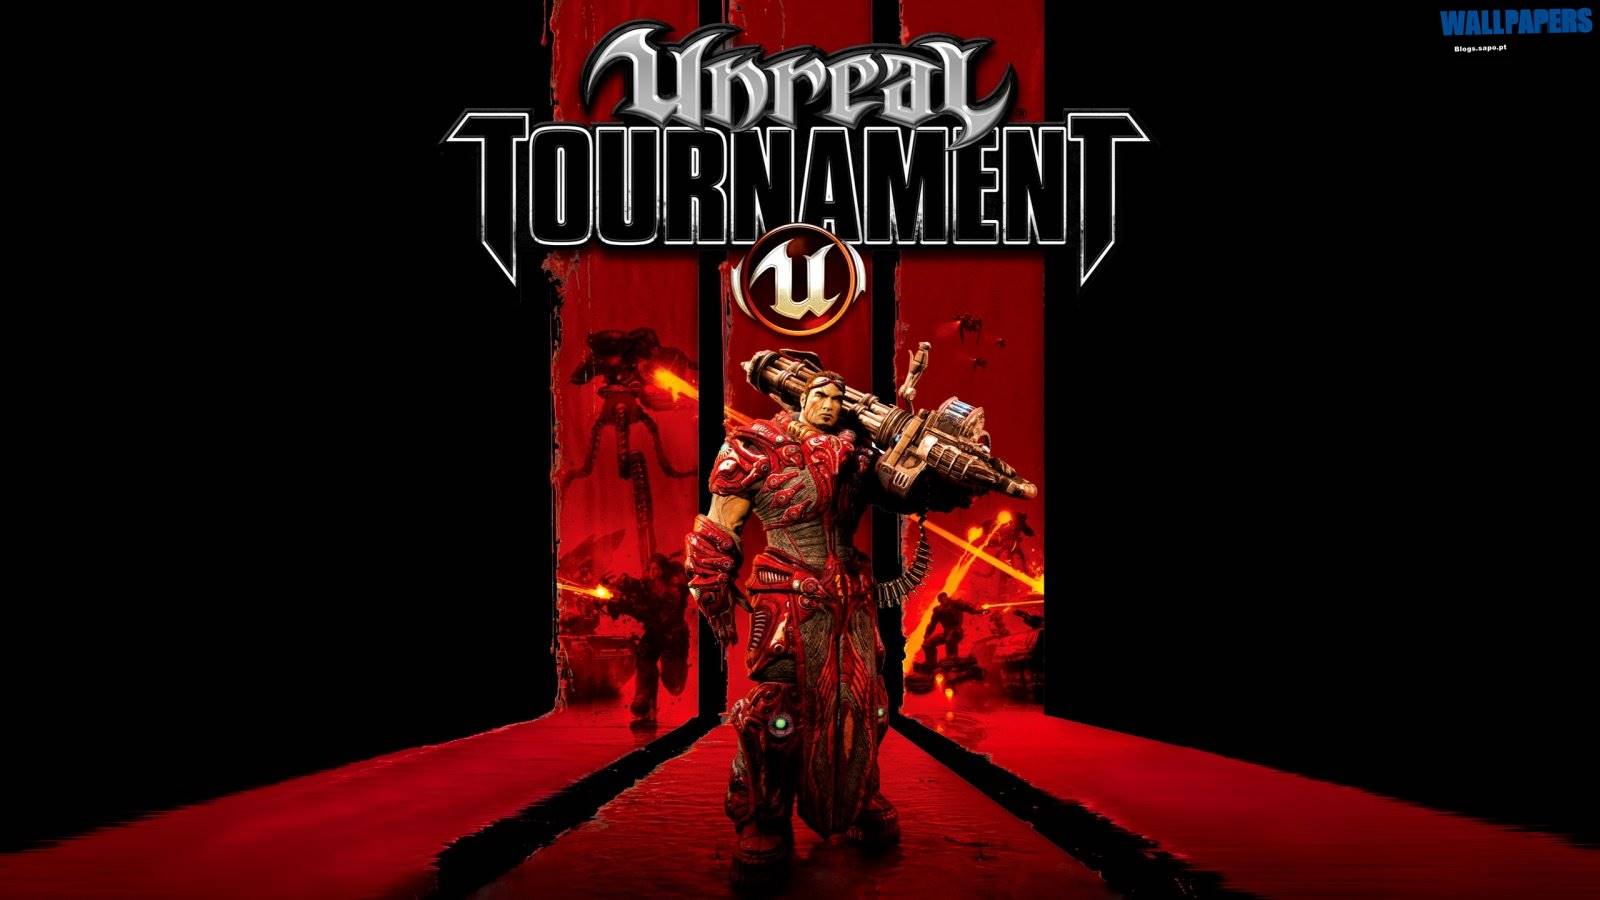 change resolution manually in file unreal tournament